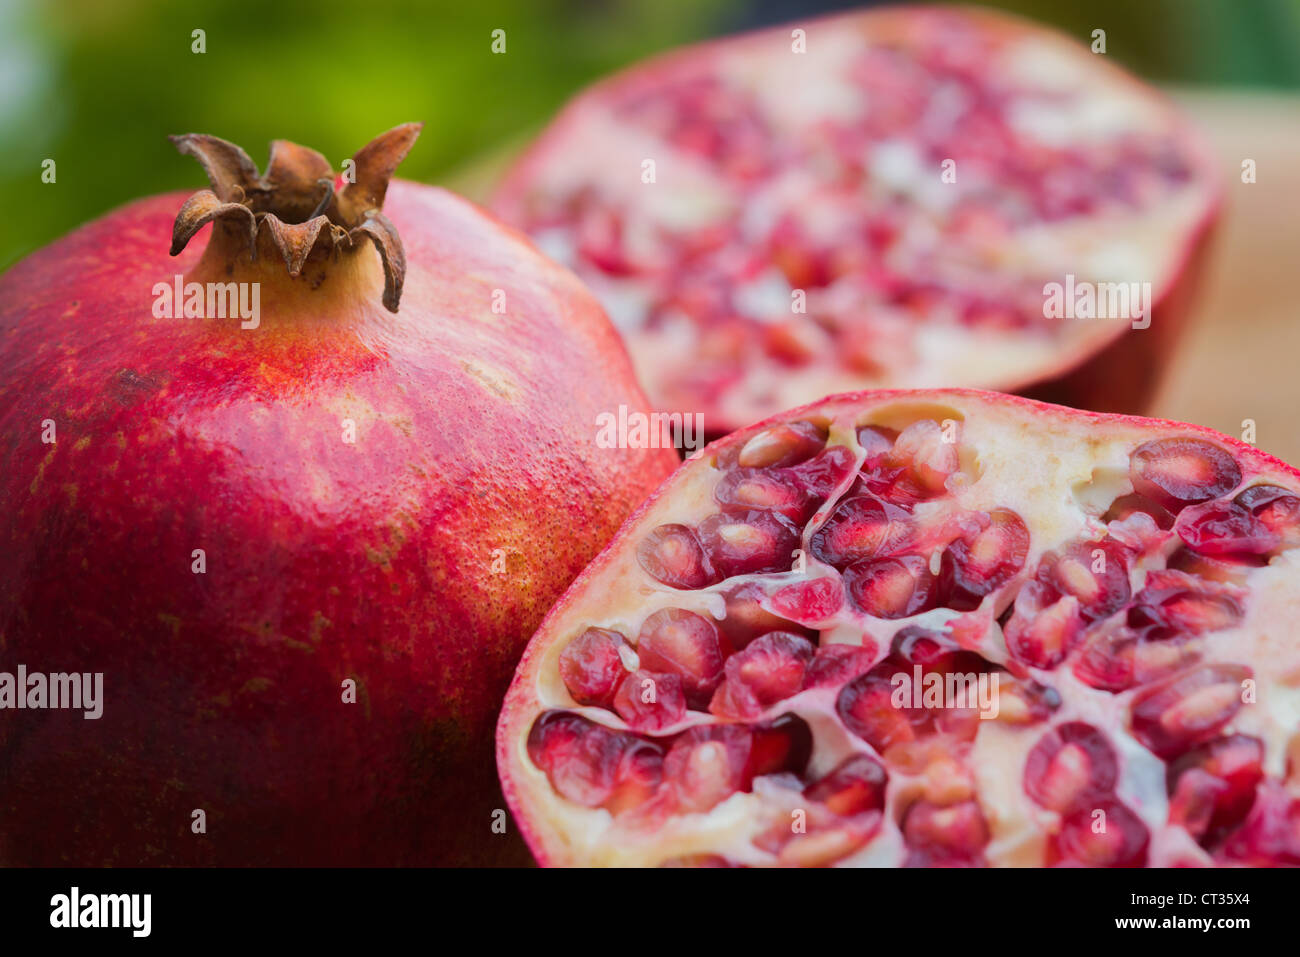 This is an image of Pomegranate fruit. Stock Photo